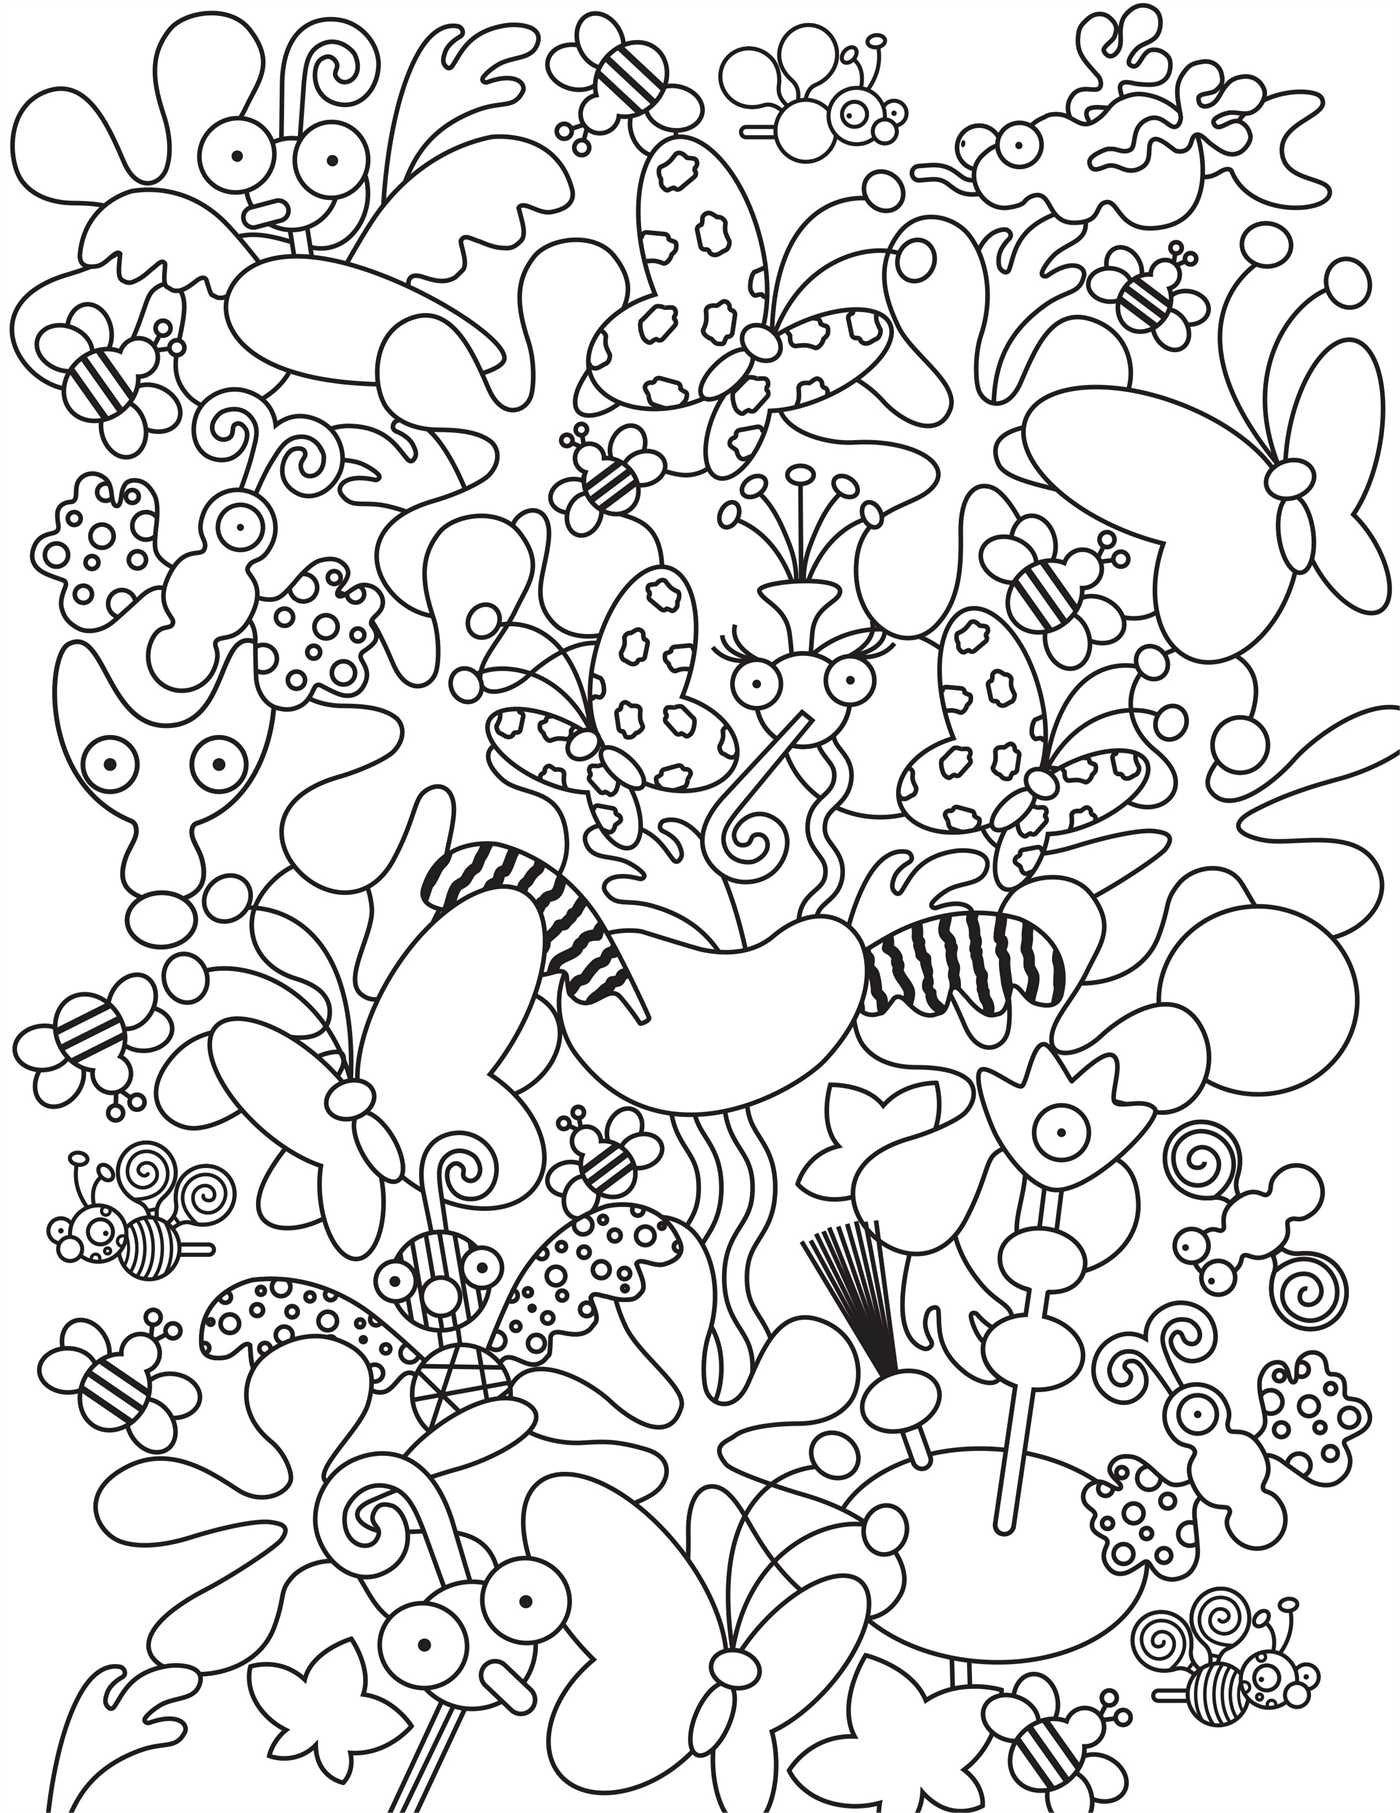 New Doodle Coloring Pages for Adult